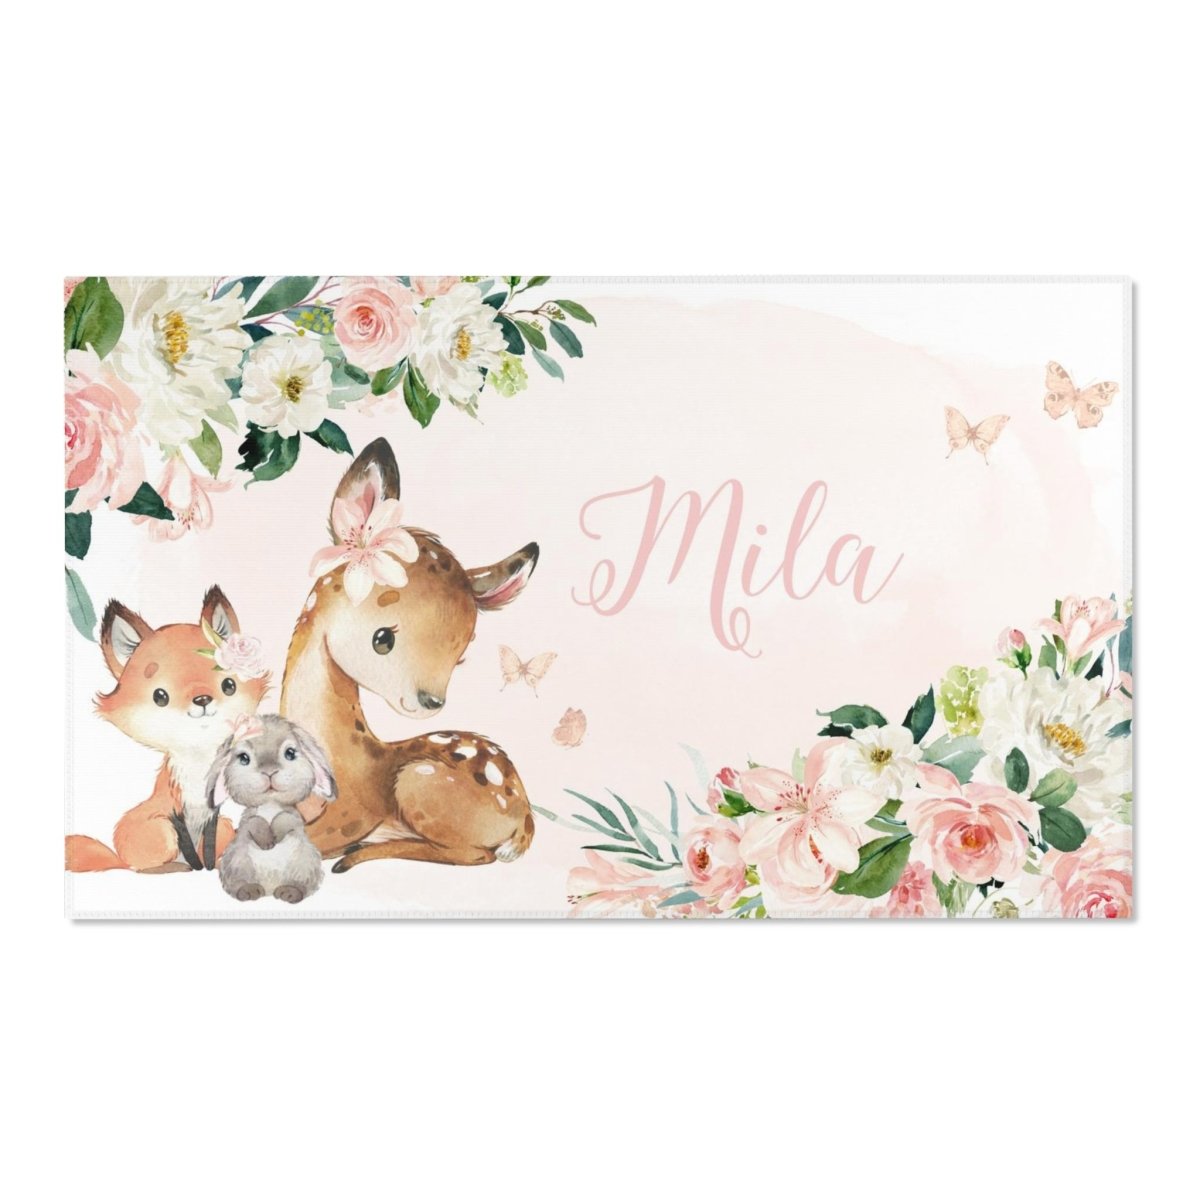 Woodland Meadows Personalized Nursery Rug - gender_girl, text, Theme_Floral